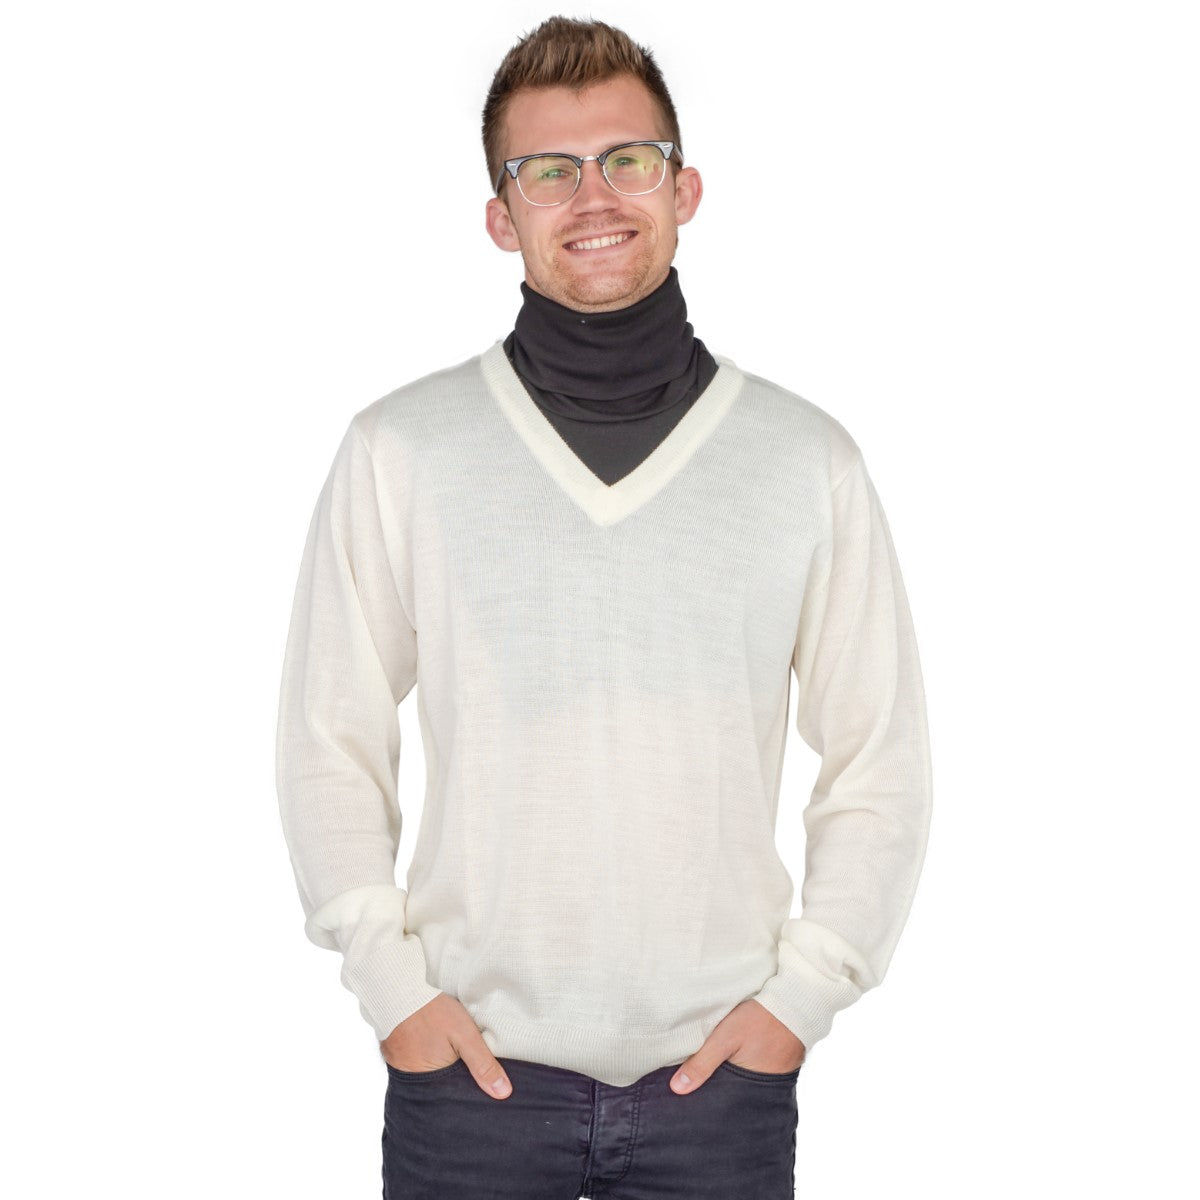 Crazy Cousin White V-Neck Sweater with Black Dickey 3